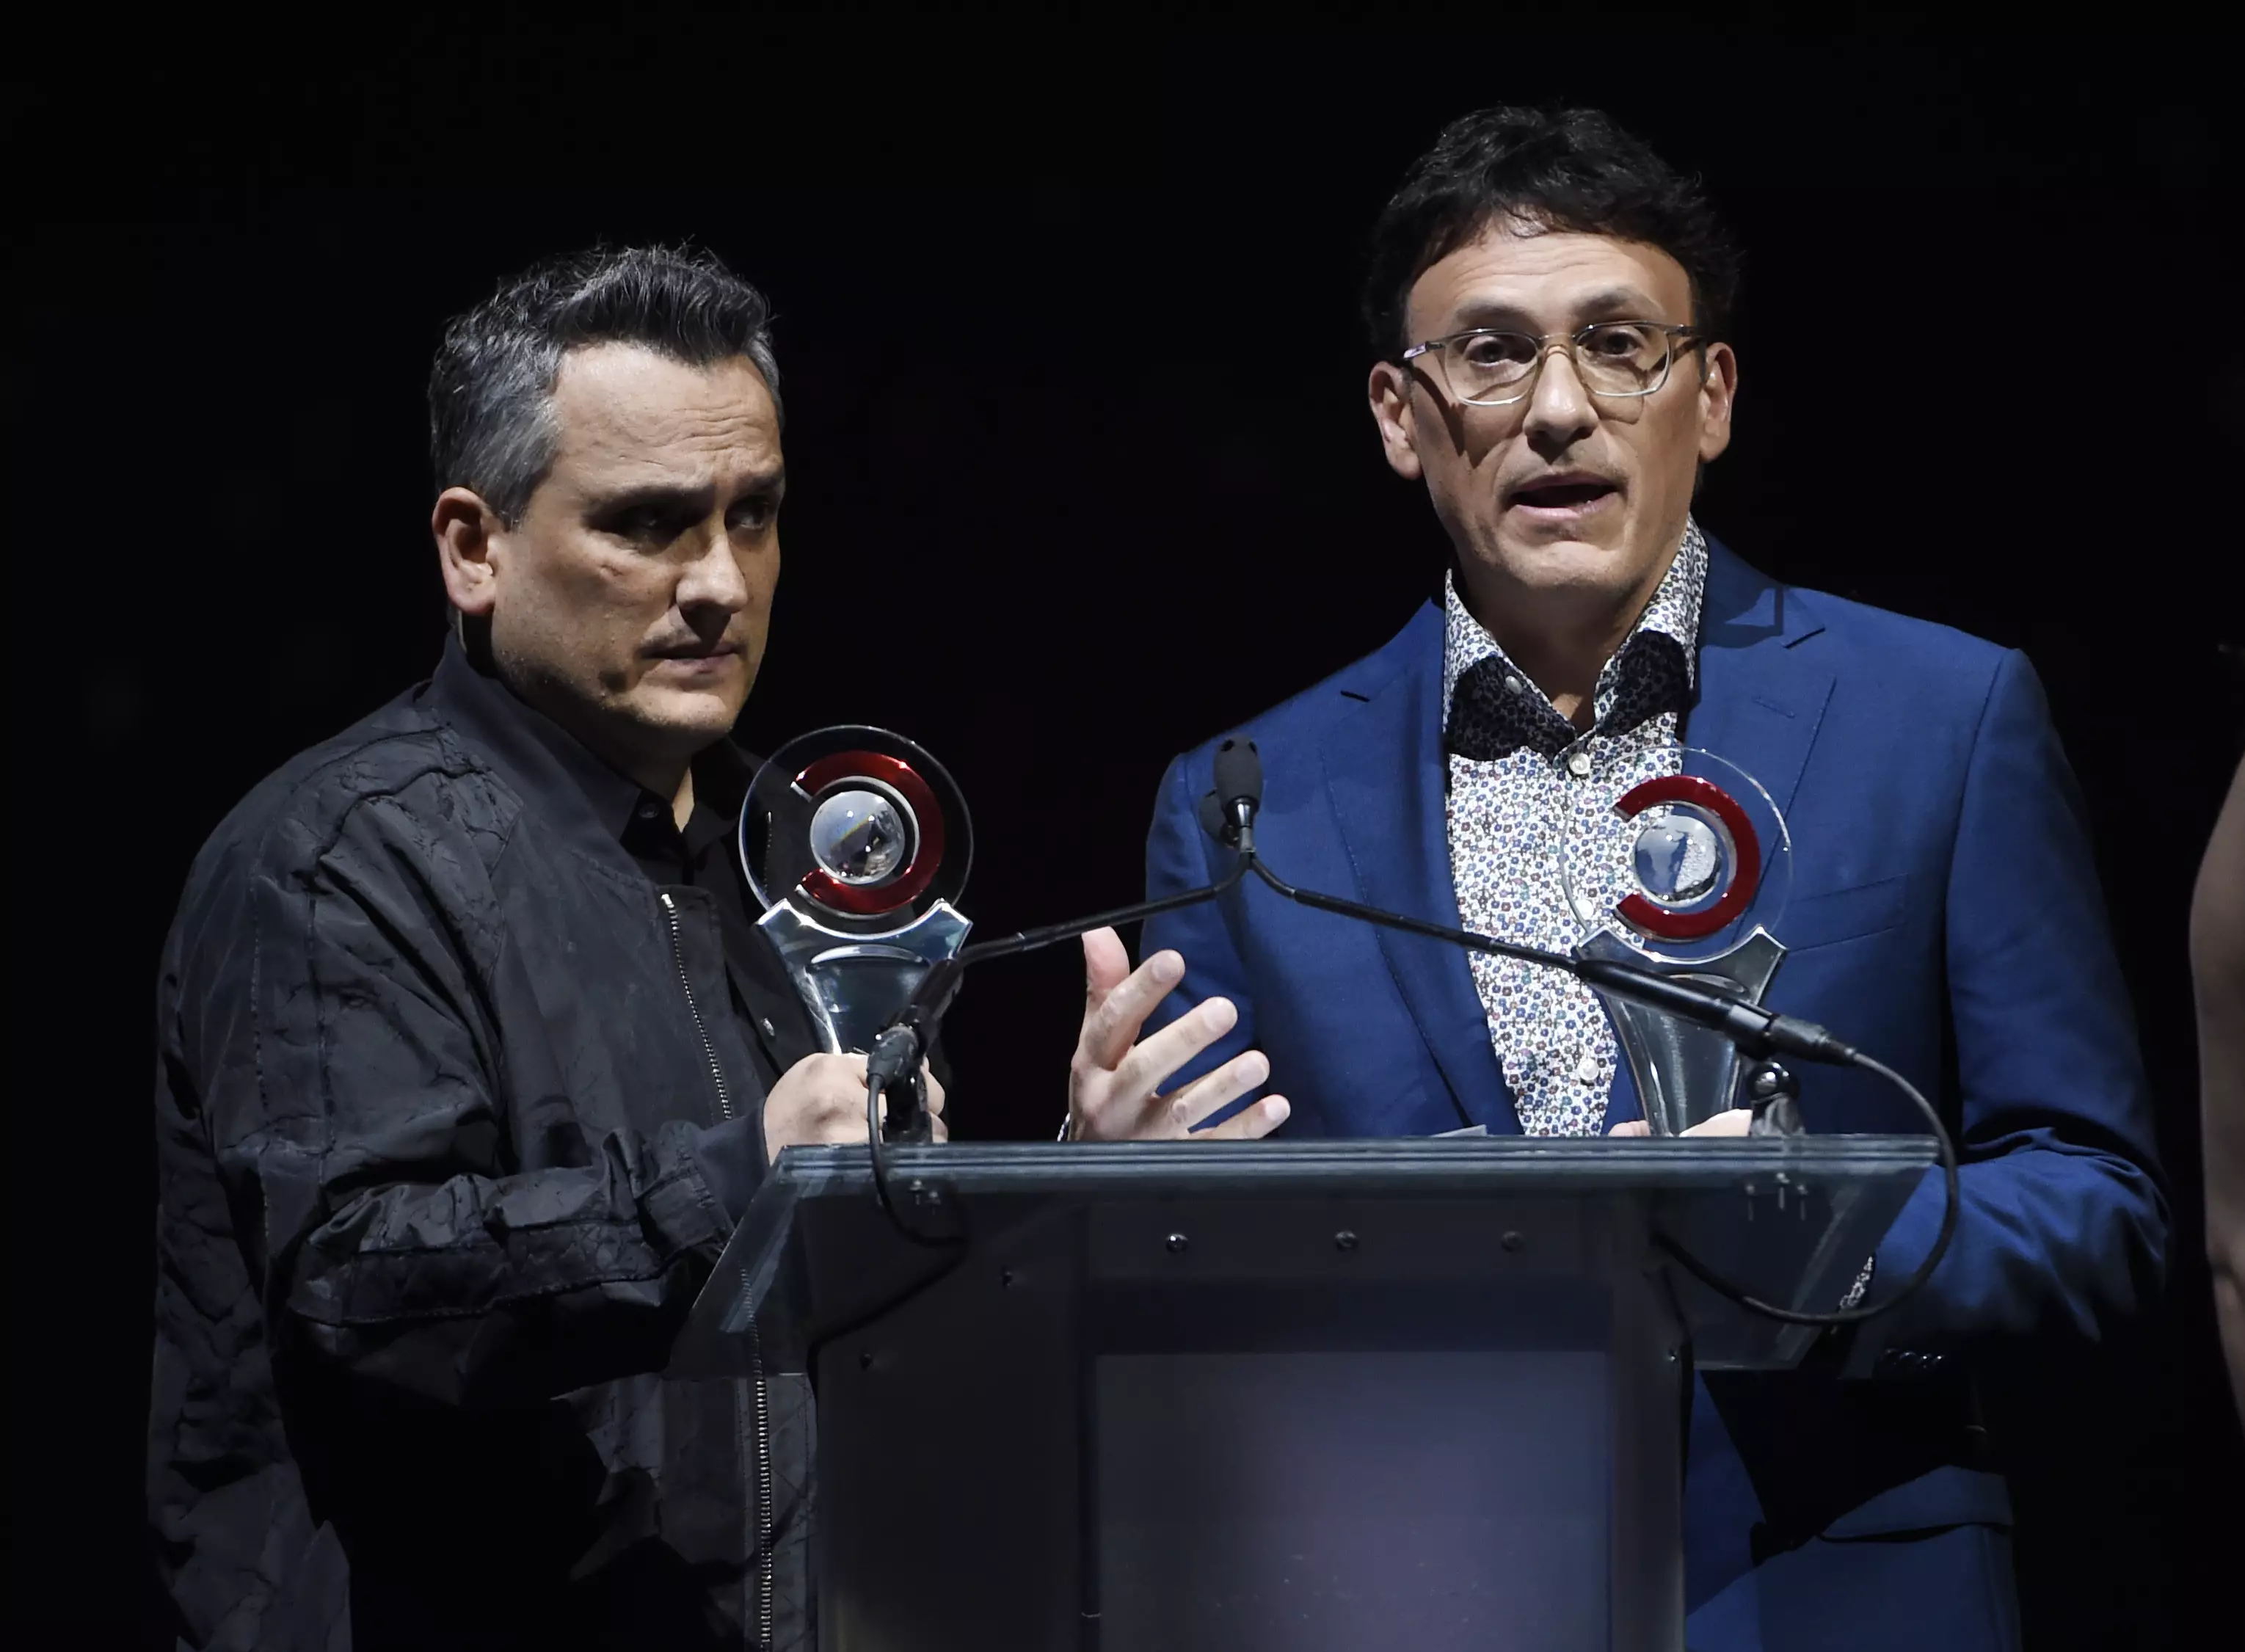 The Russo brothers have written a letter asking fans not to spoil the film.